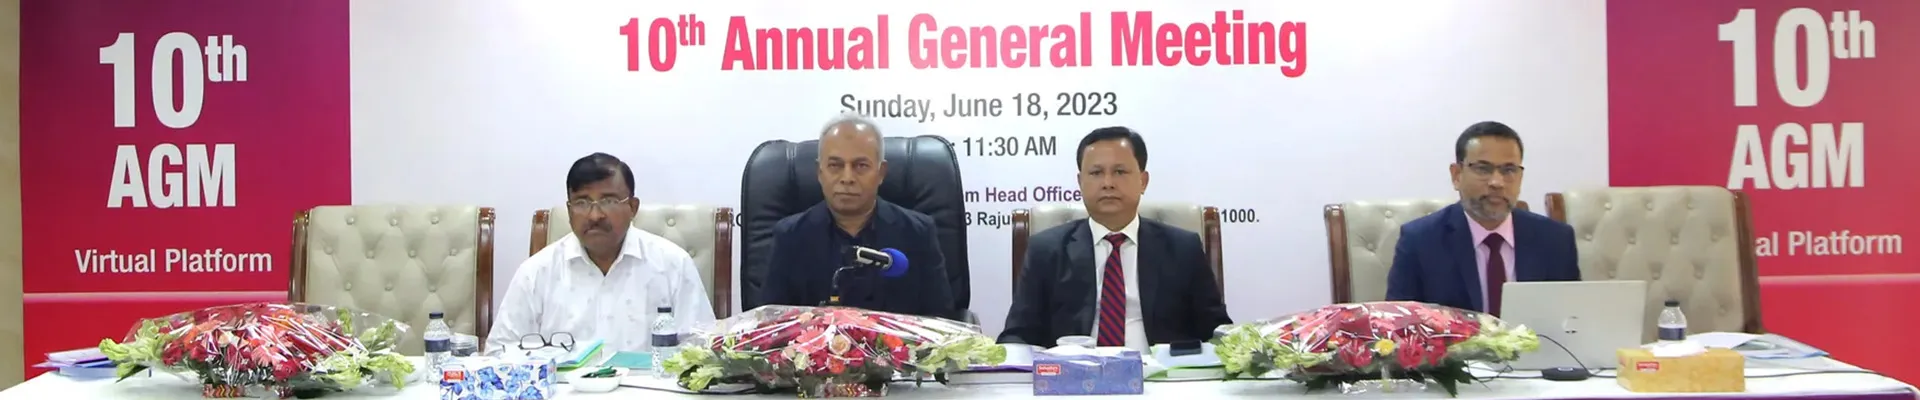 SBAC The 10th Annual General Meeting (AGM) of SBAC Bank Limited